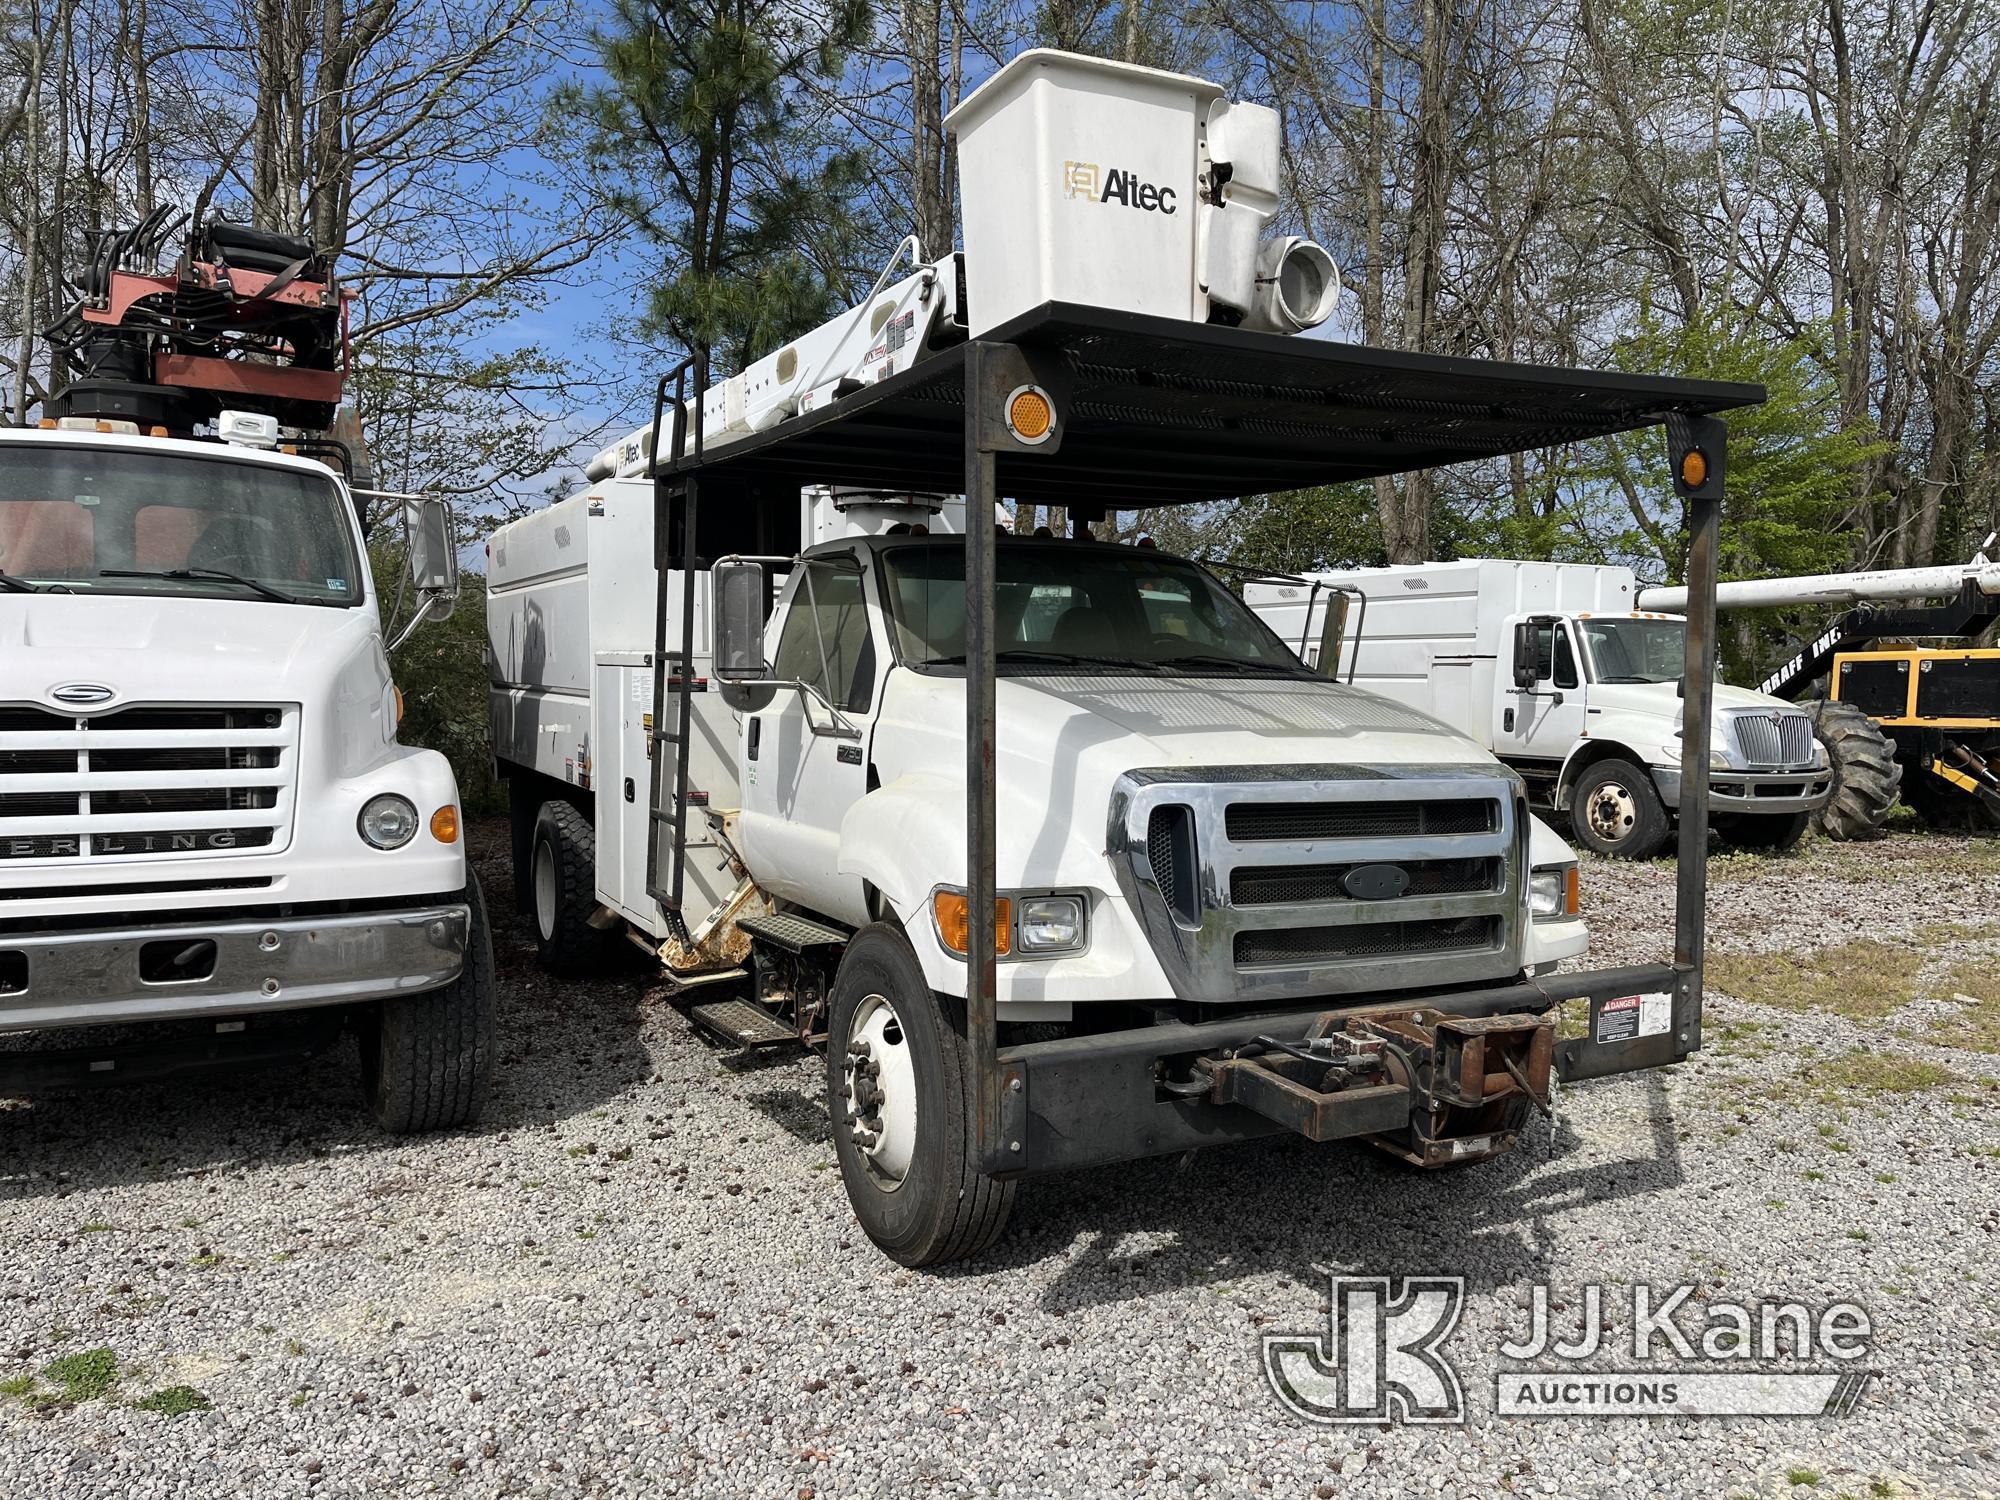 (Wakefield, VA) Altec LR756, Over-Center Bucket Truck mounted behind cab on 2015 Ford F750 Chipper D